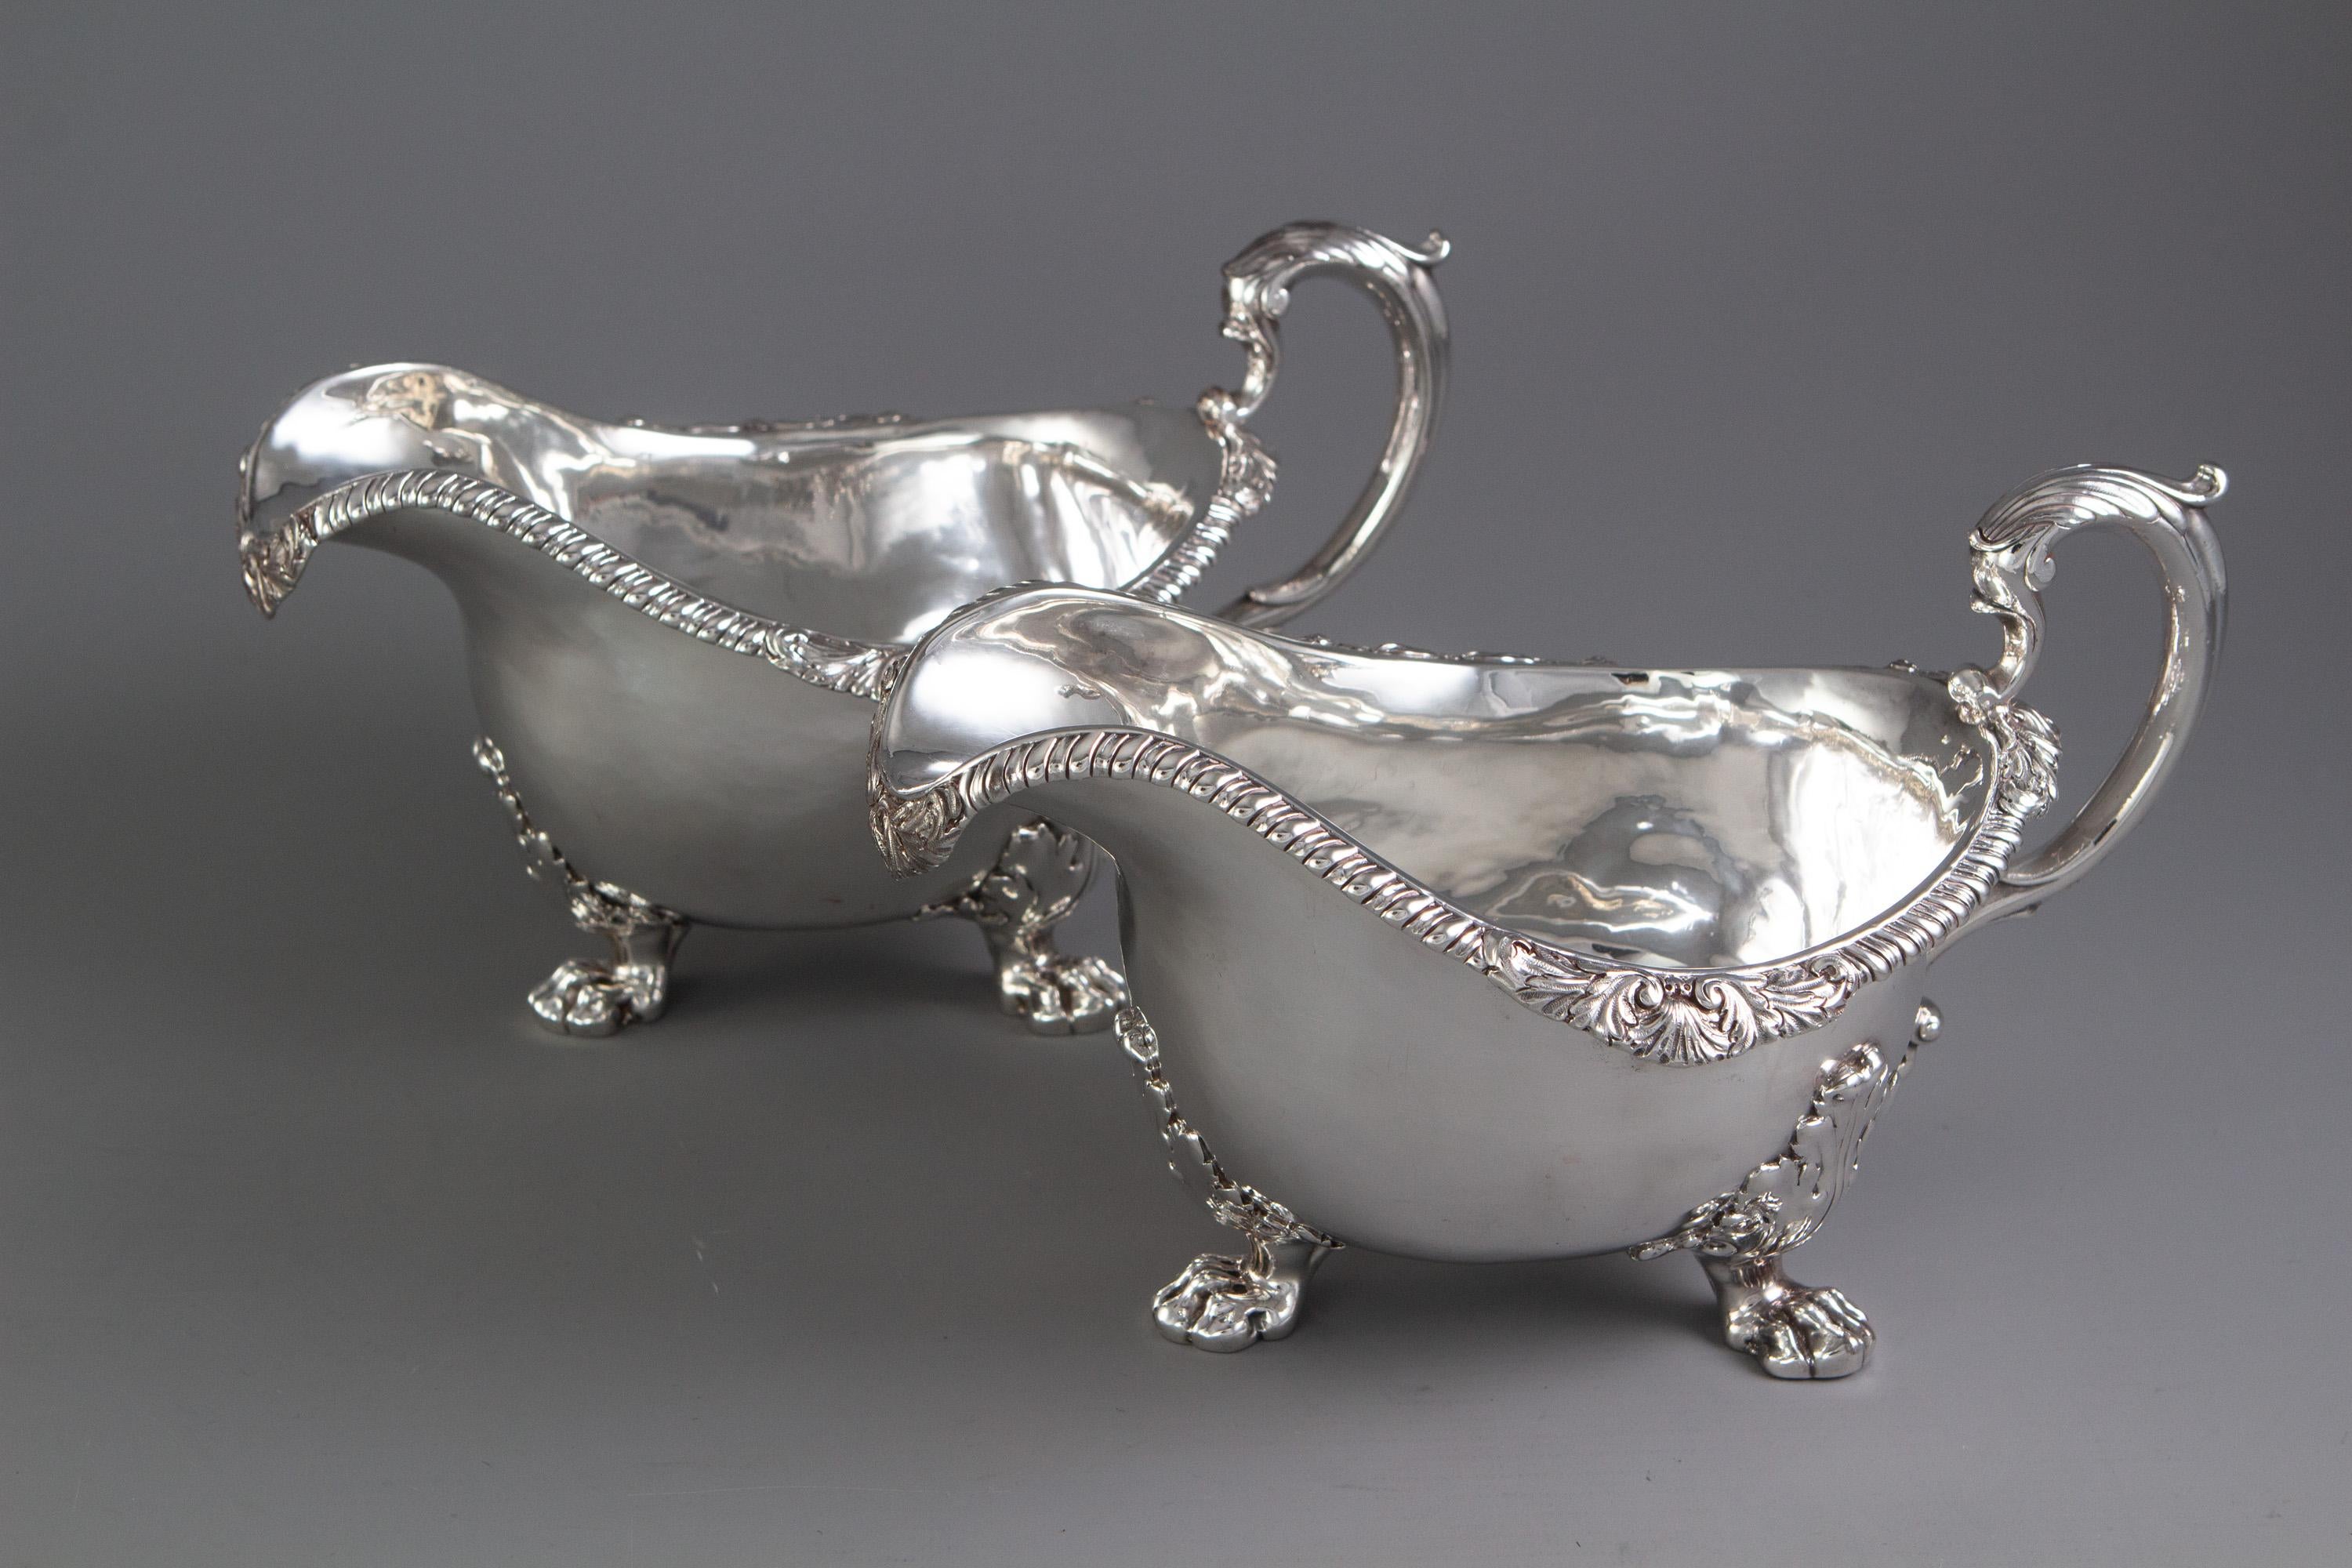 British Pair of George IV Silver Sauce Boats, London 1820 by Paul Storr